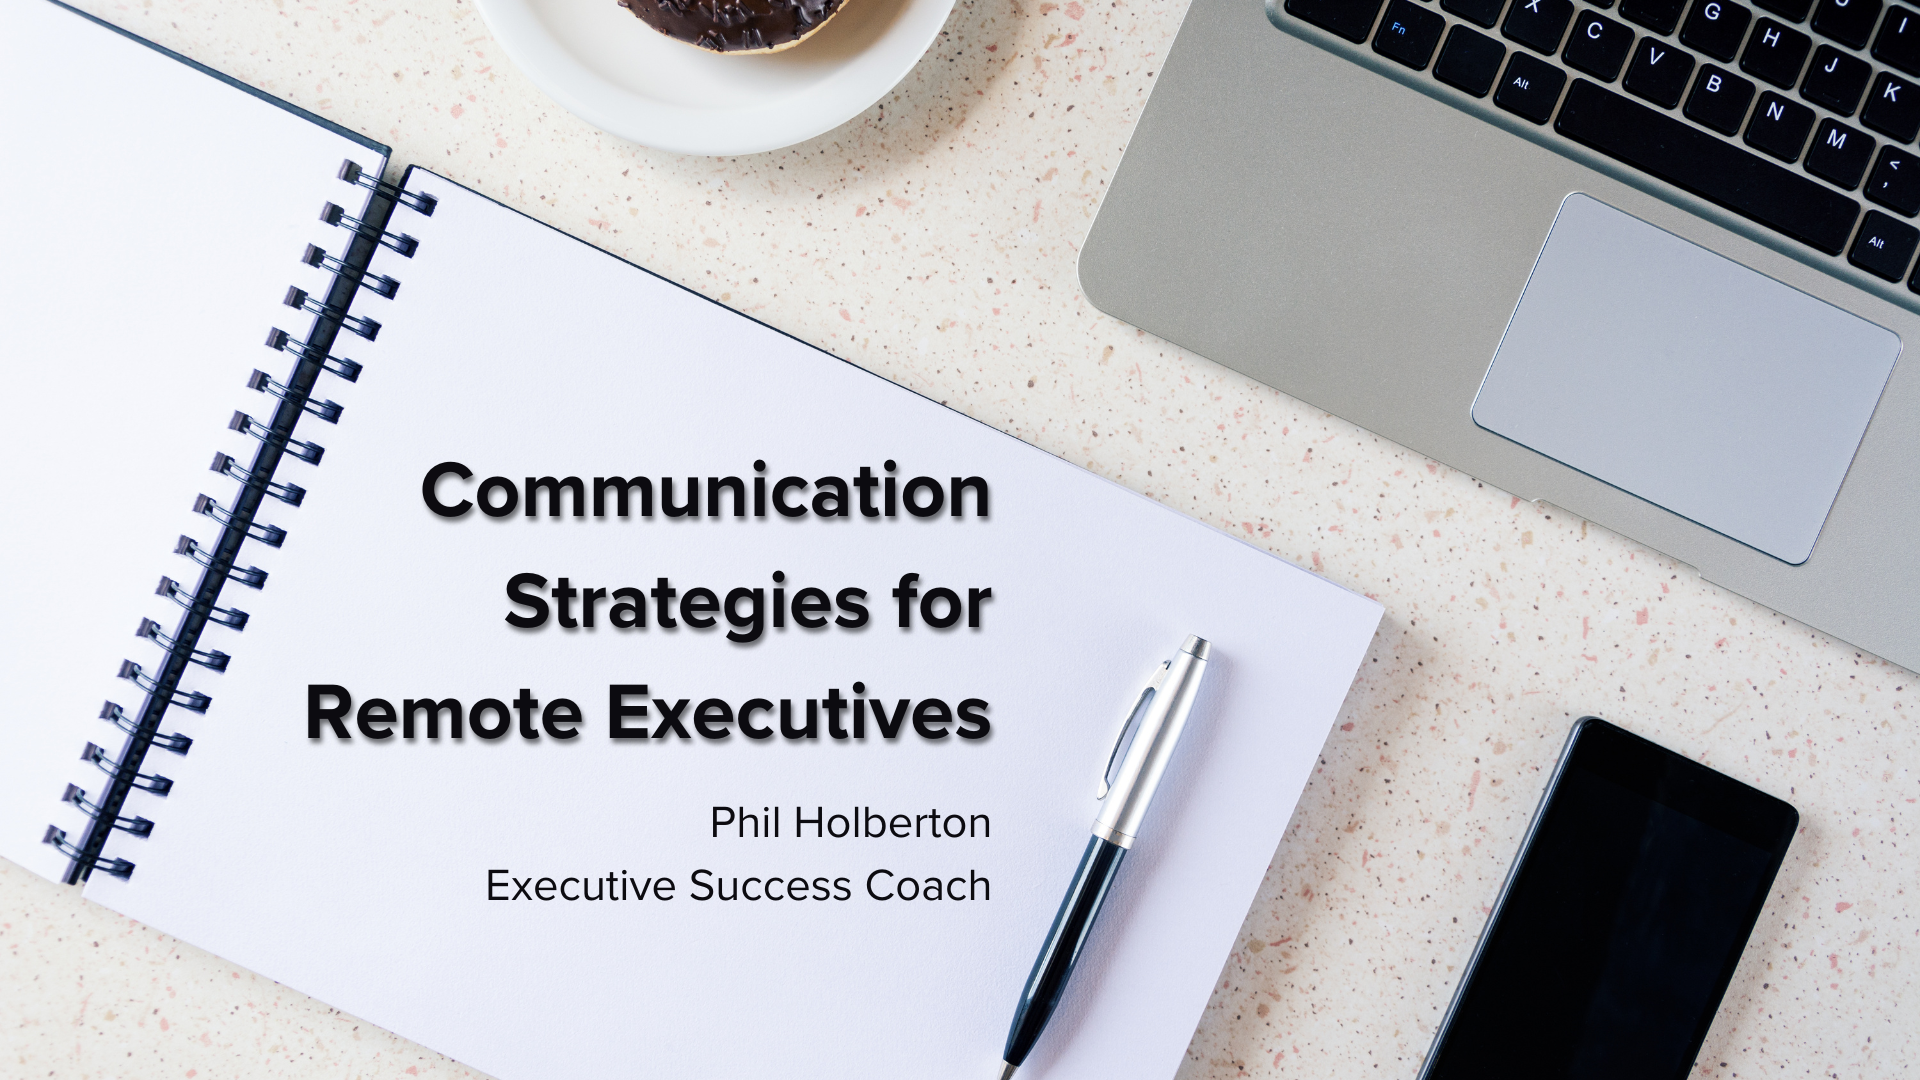 Communication Strategies for Remote Executives